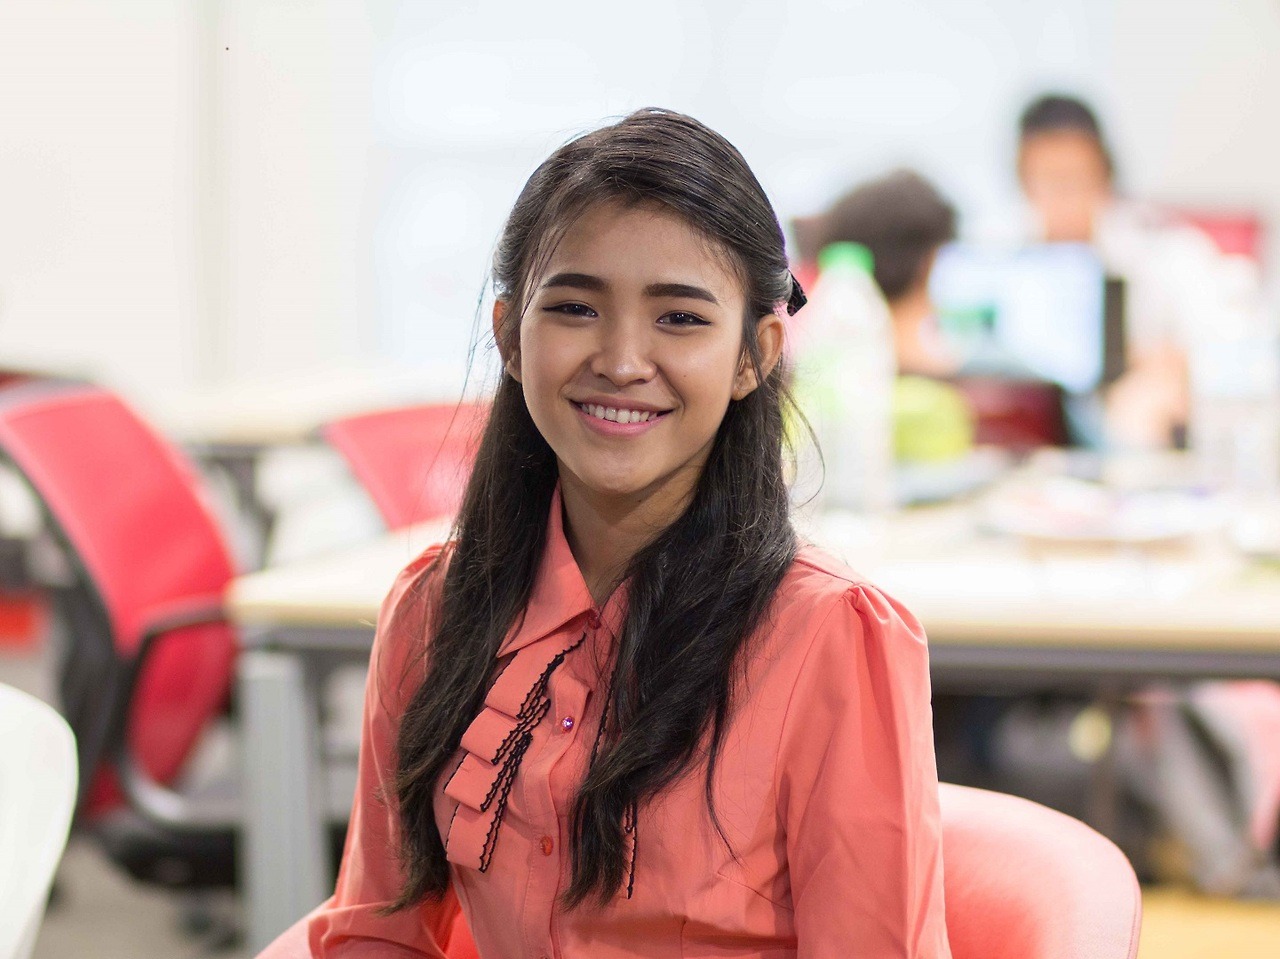 “I’m Kyawt Yamin Thwin from Myanmar, but some people know me as Julia. My dream is to be a famous civil engineer. “When I got my matriculation exam results, I was still unsure what my career interests were. Luckily, my parents gave me the freedom to...